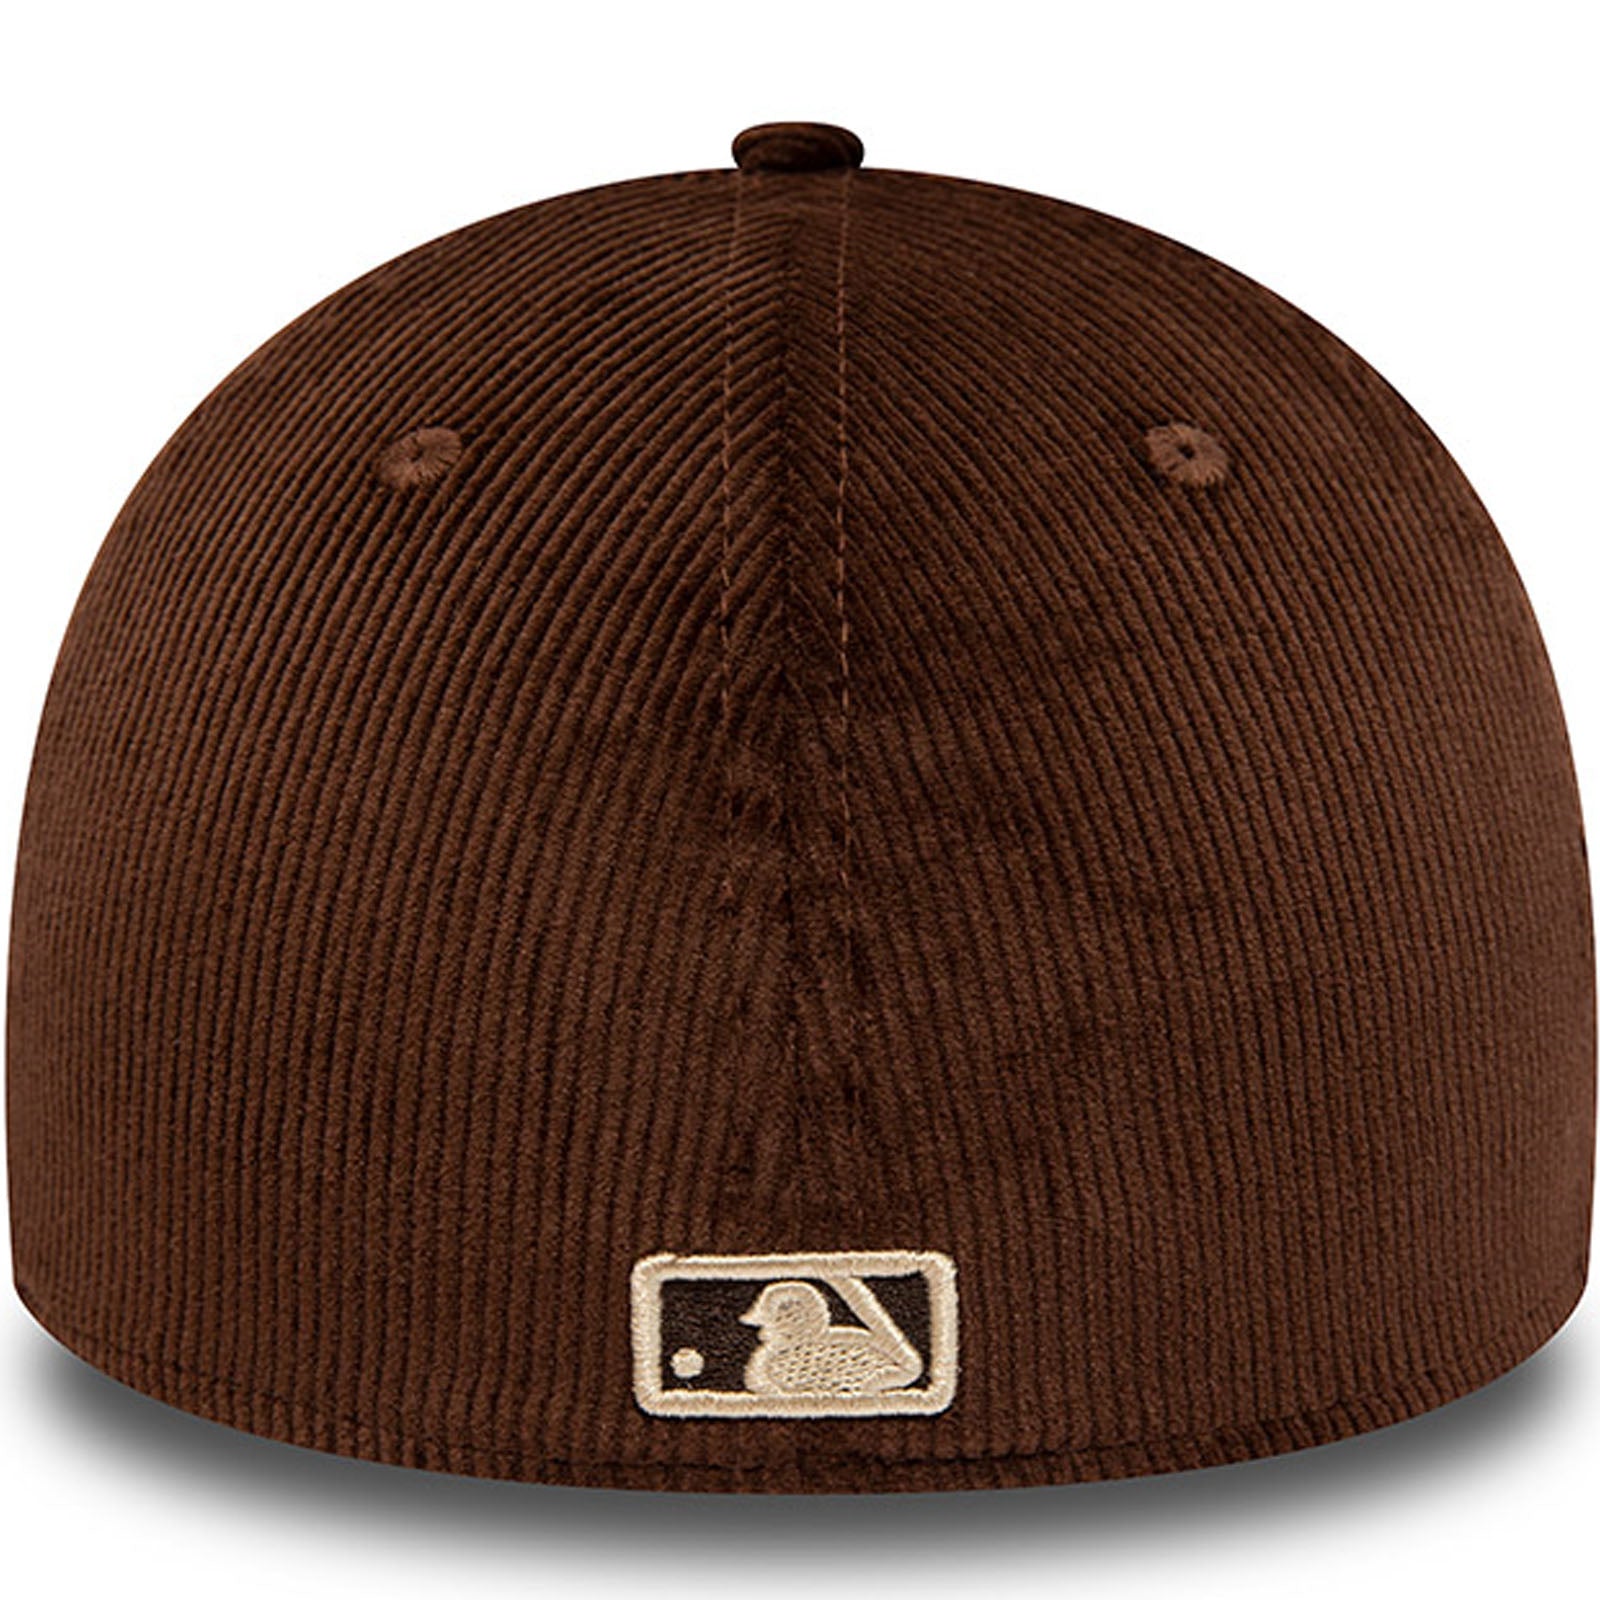 MLB TriTone Brown 59Fifty Fitted Hat Collection by MLB x New Era   Strictly Fitteds